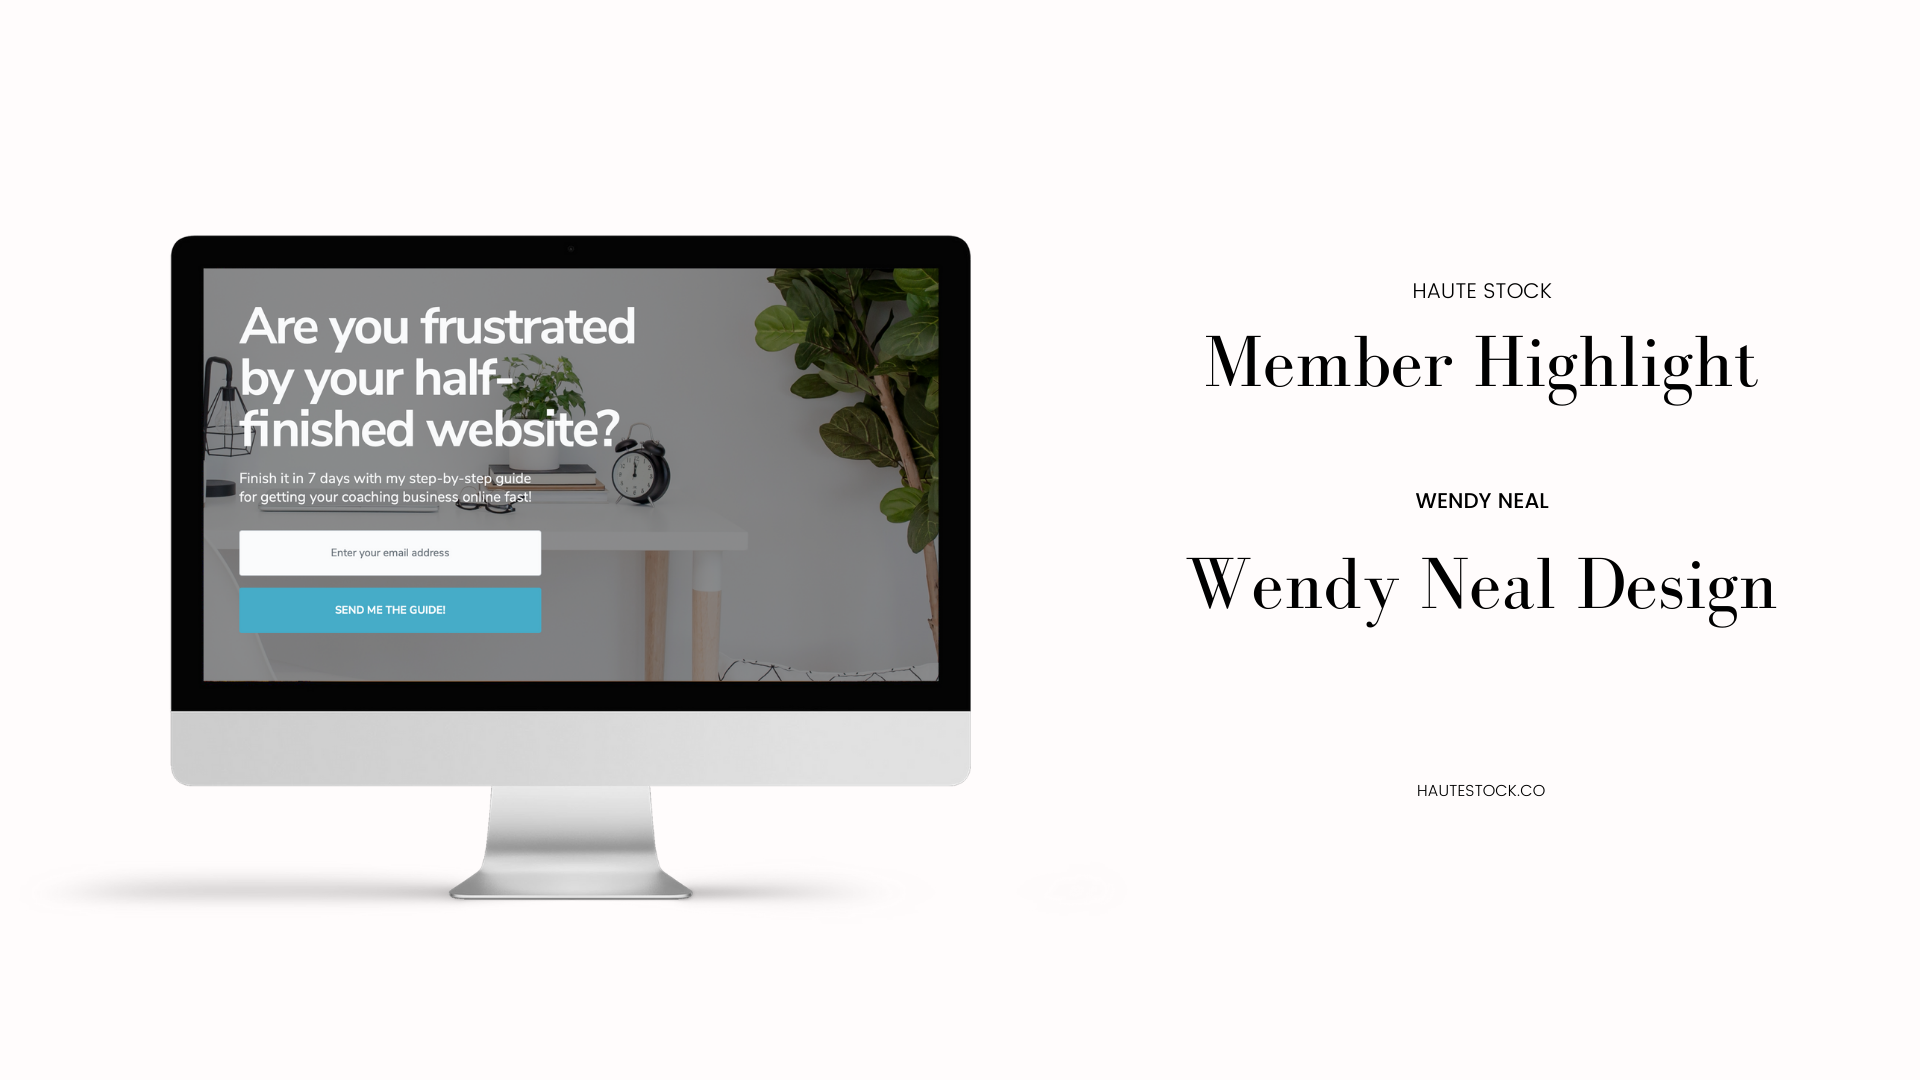 Read more about Wendy's journey to being an entrepreneur providing web design services for health & wellness professionals on Haute Stock's blog.